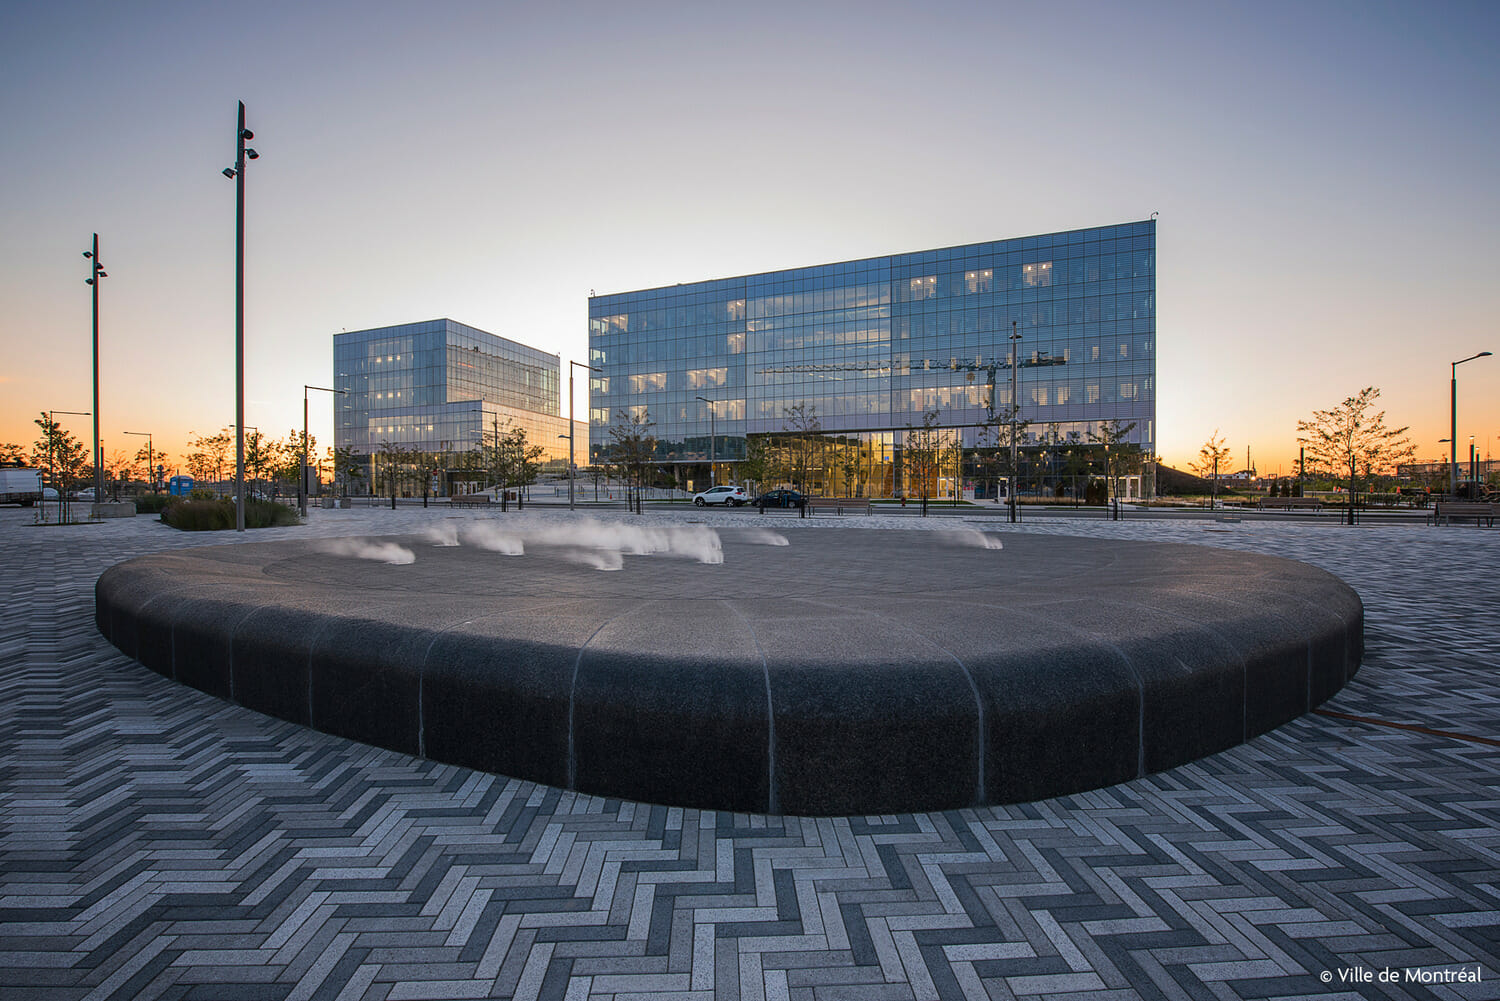 A circular bench in front of a building at dusk.